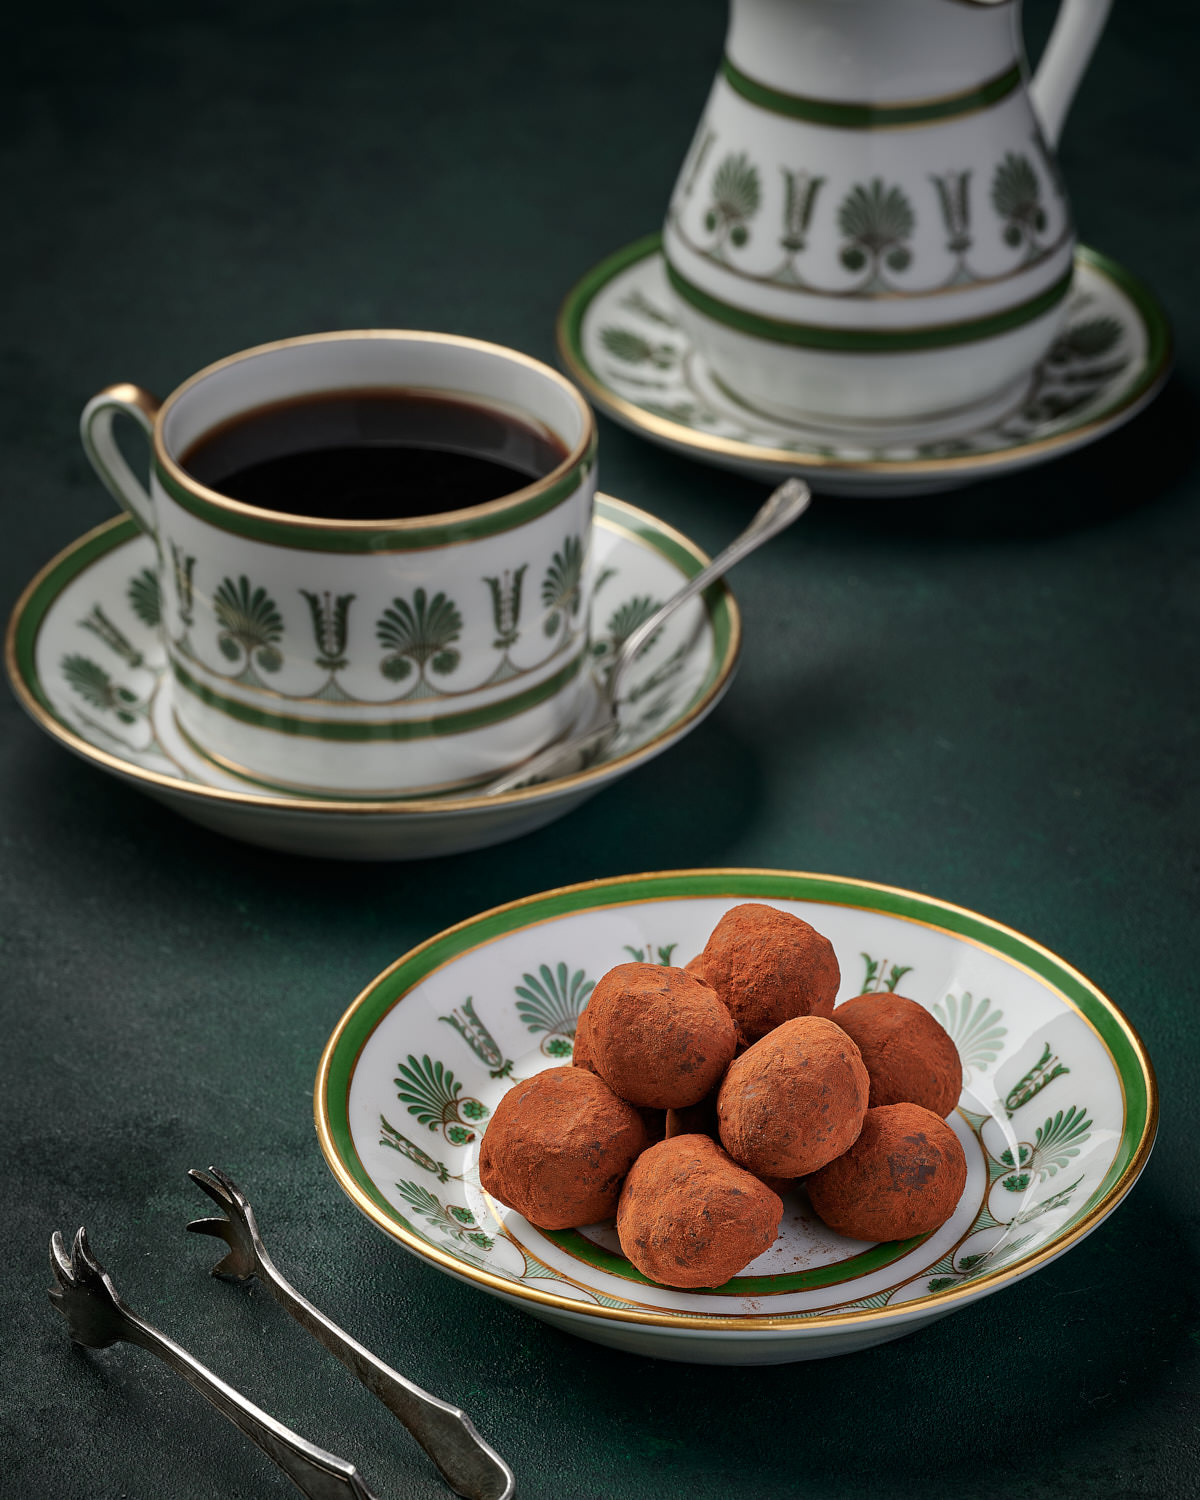 Editorial Cookbook Food Photography of Vodka Truffles and coffee